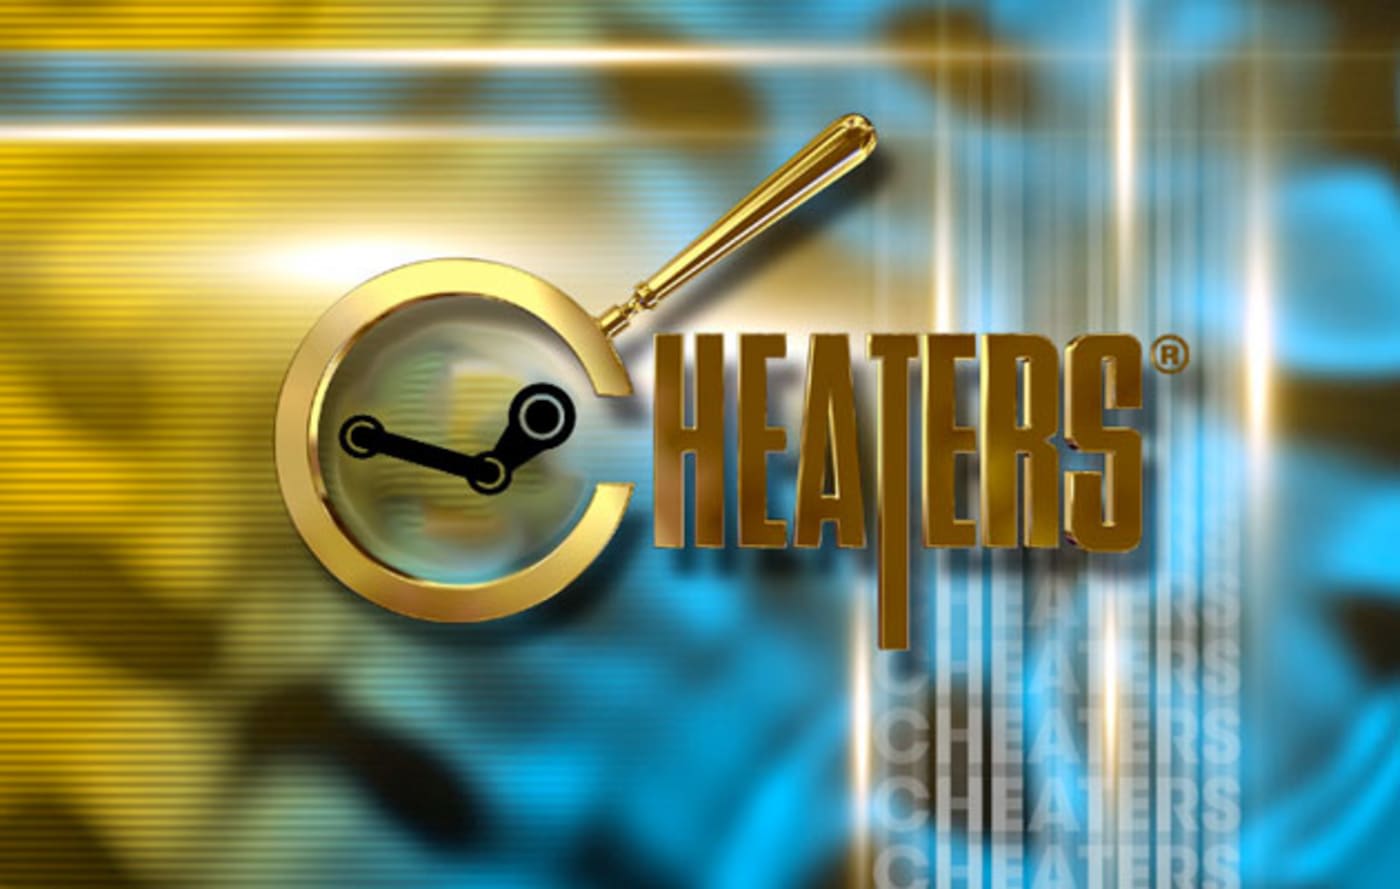 Valve will ban Steam cheaters via their linked phone numbers | Engadget